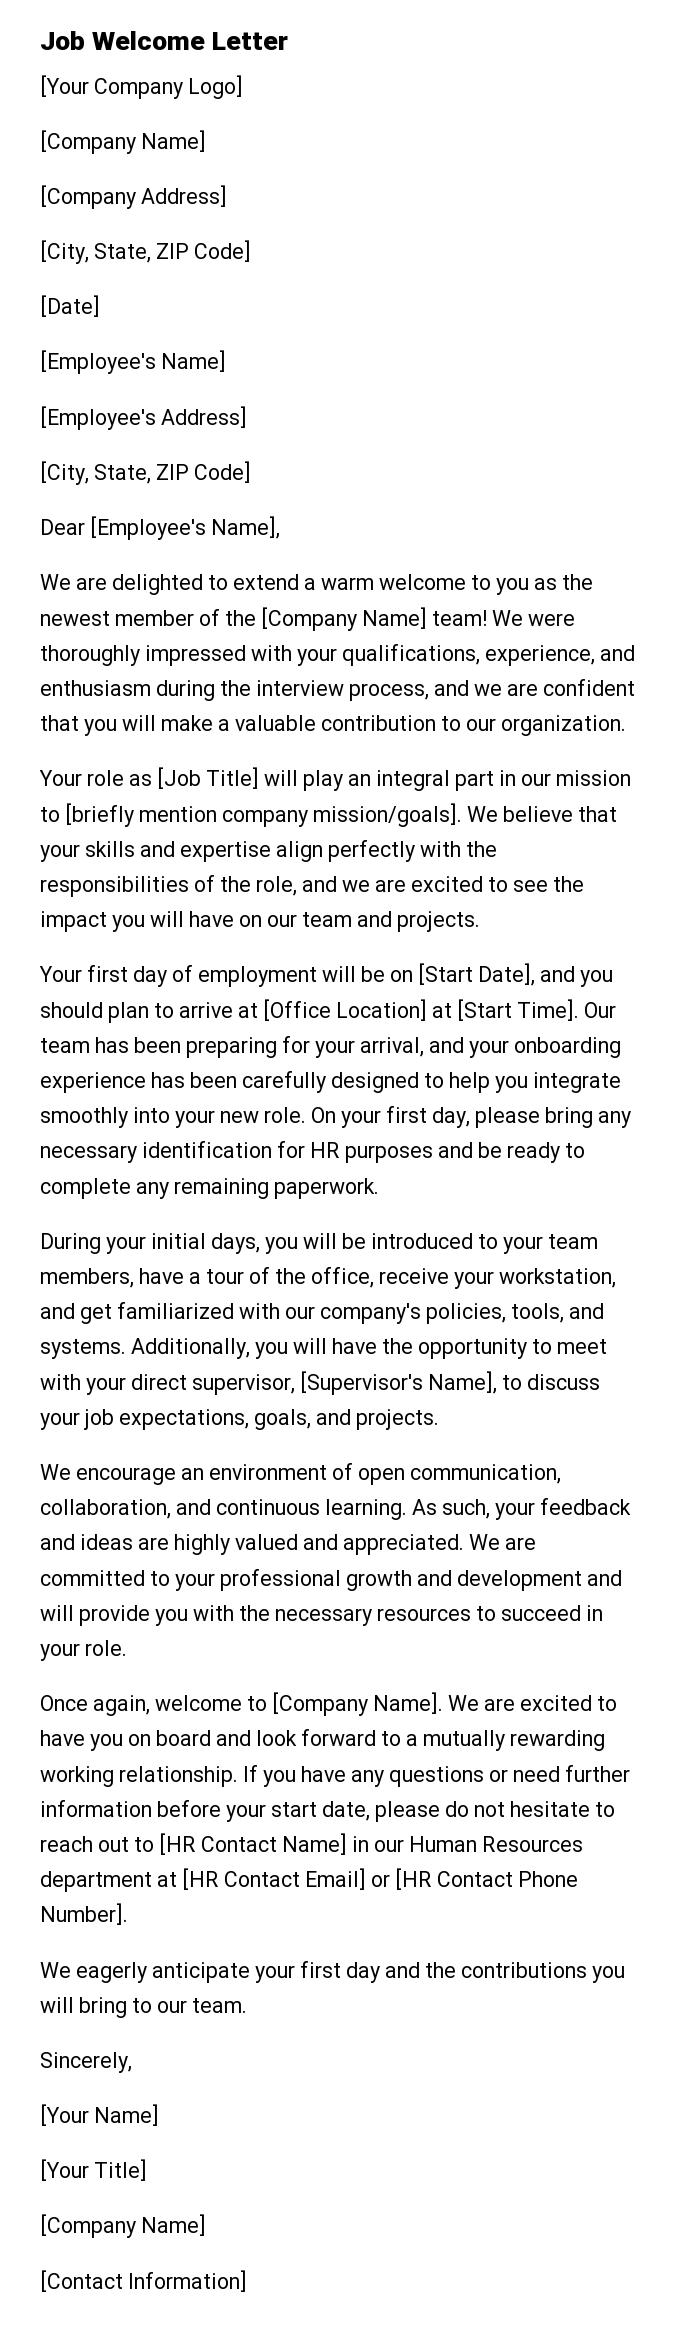 Job Welcome Letter